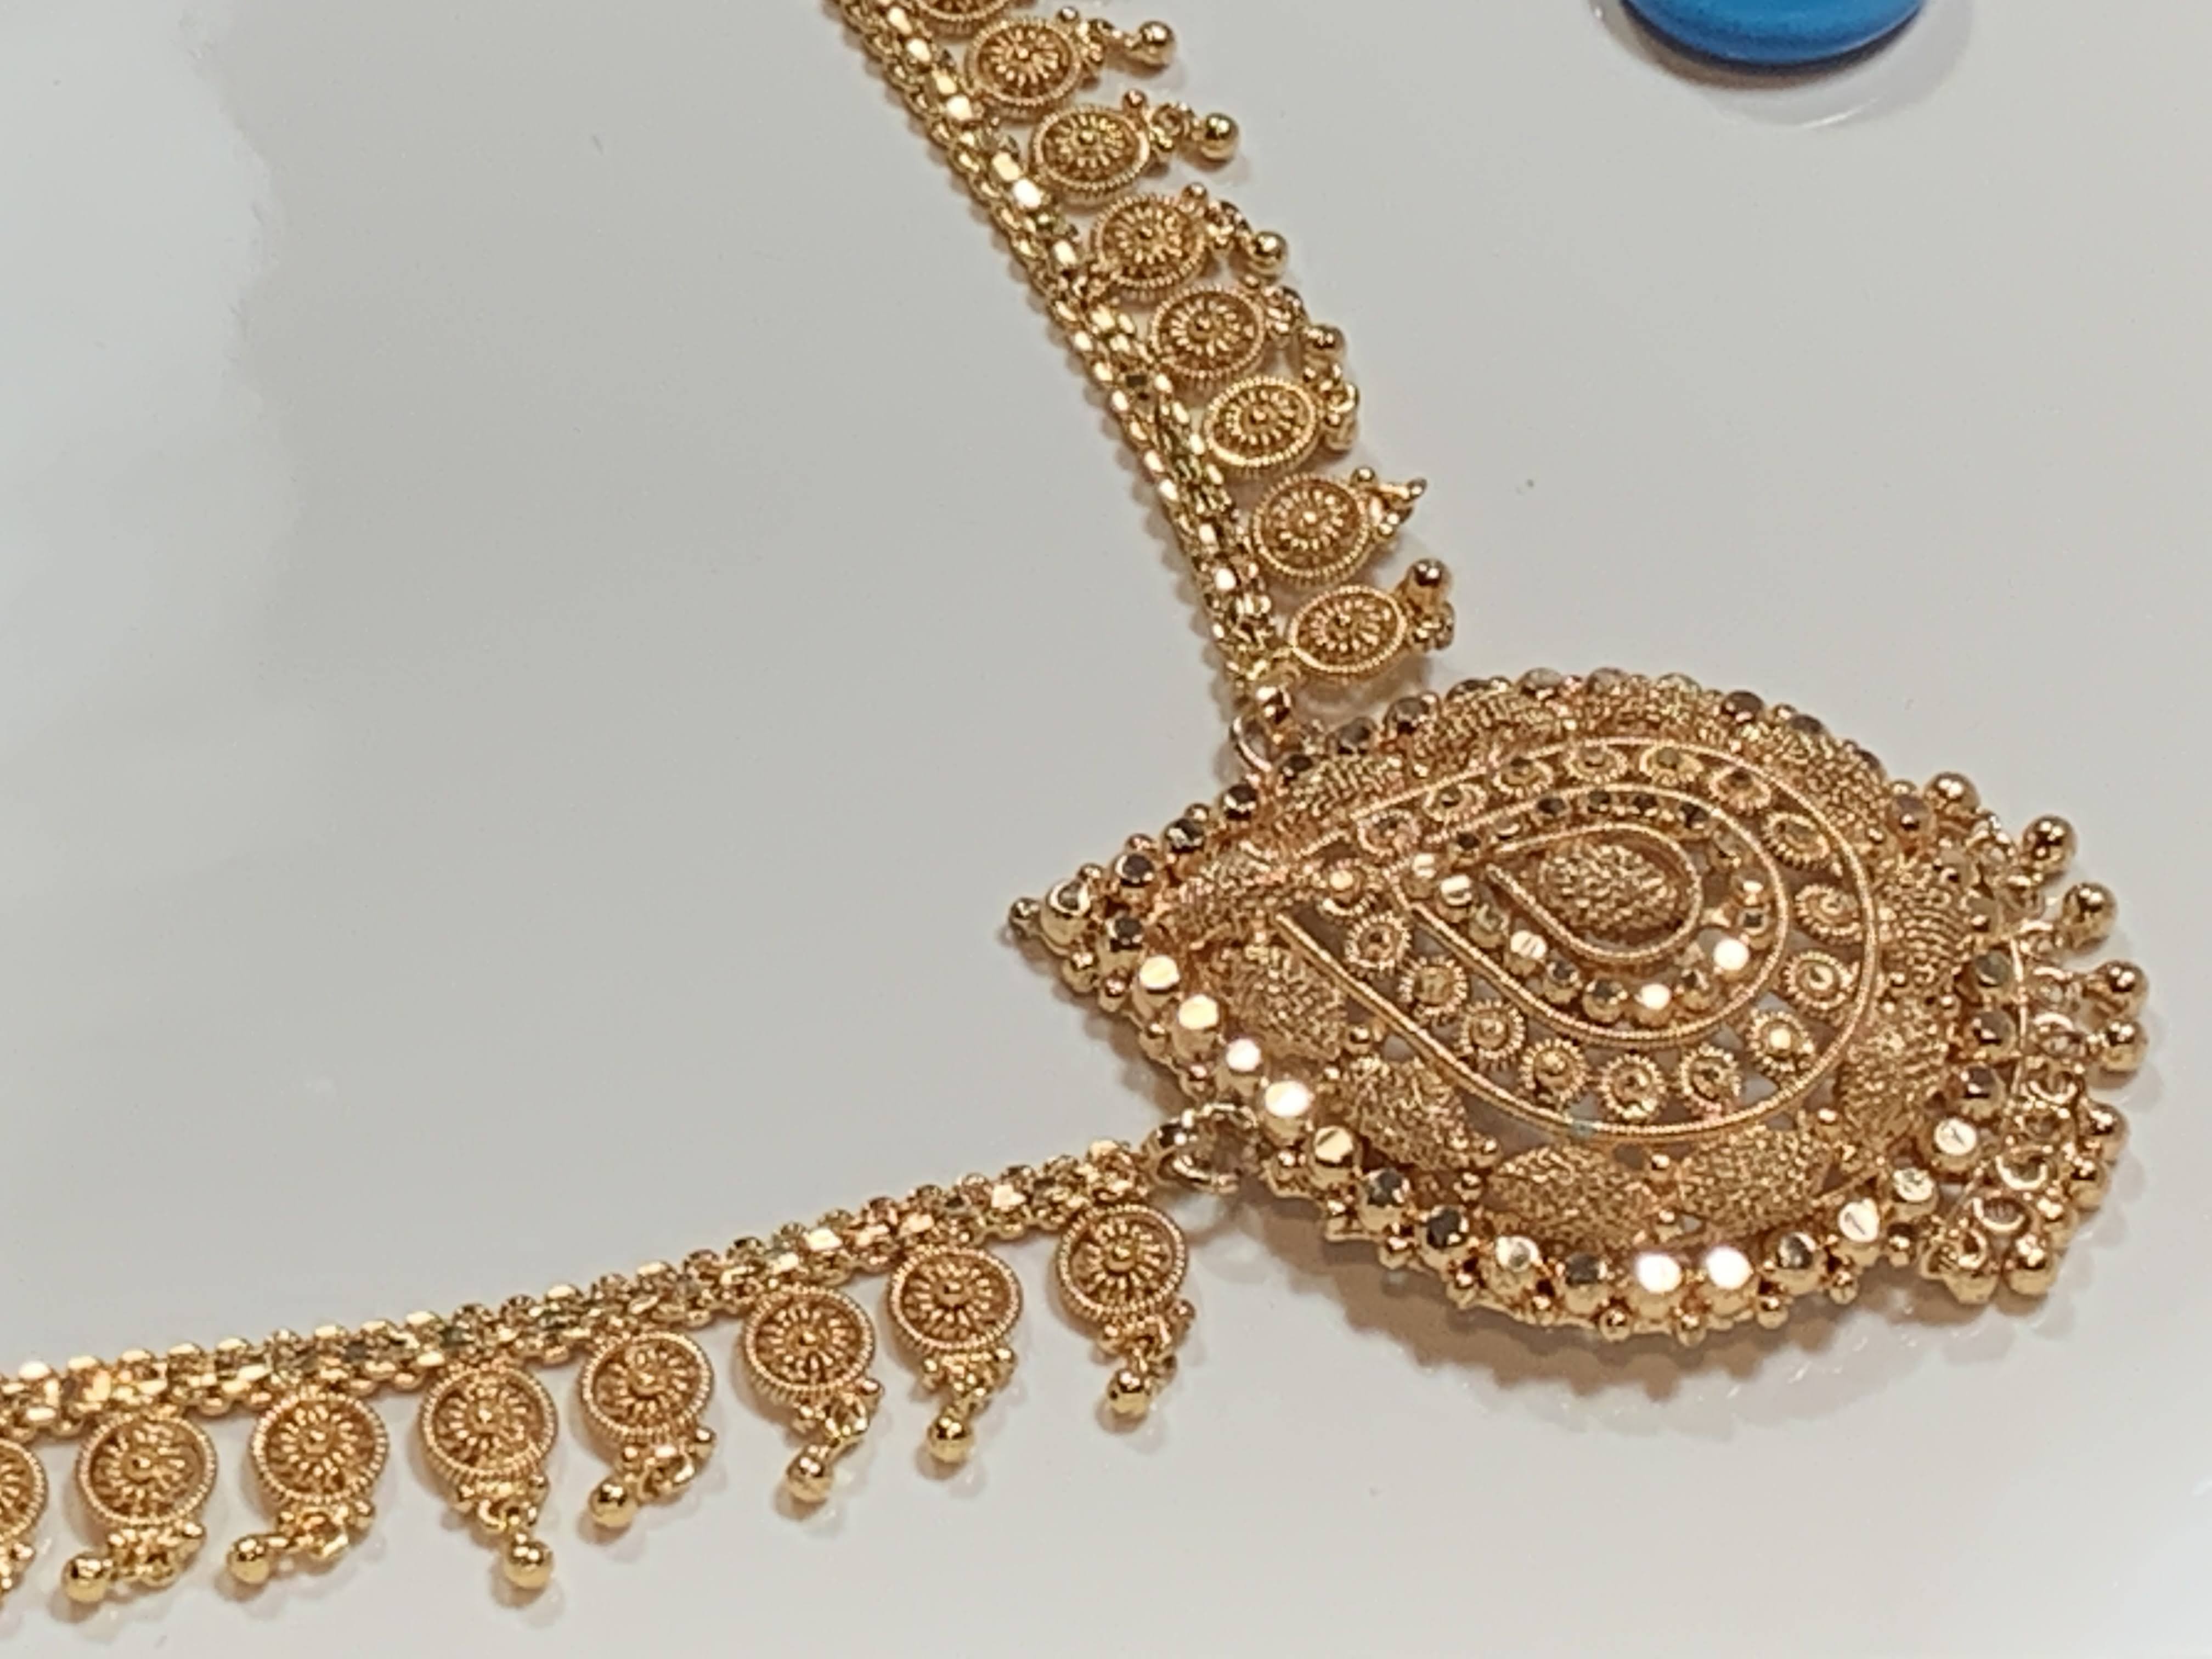 Gold Plated - Temple Jewelry - Long Necklace with Pendant - 1 gram gold plated